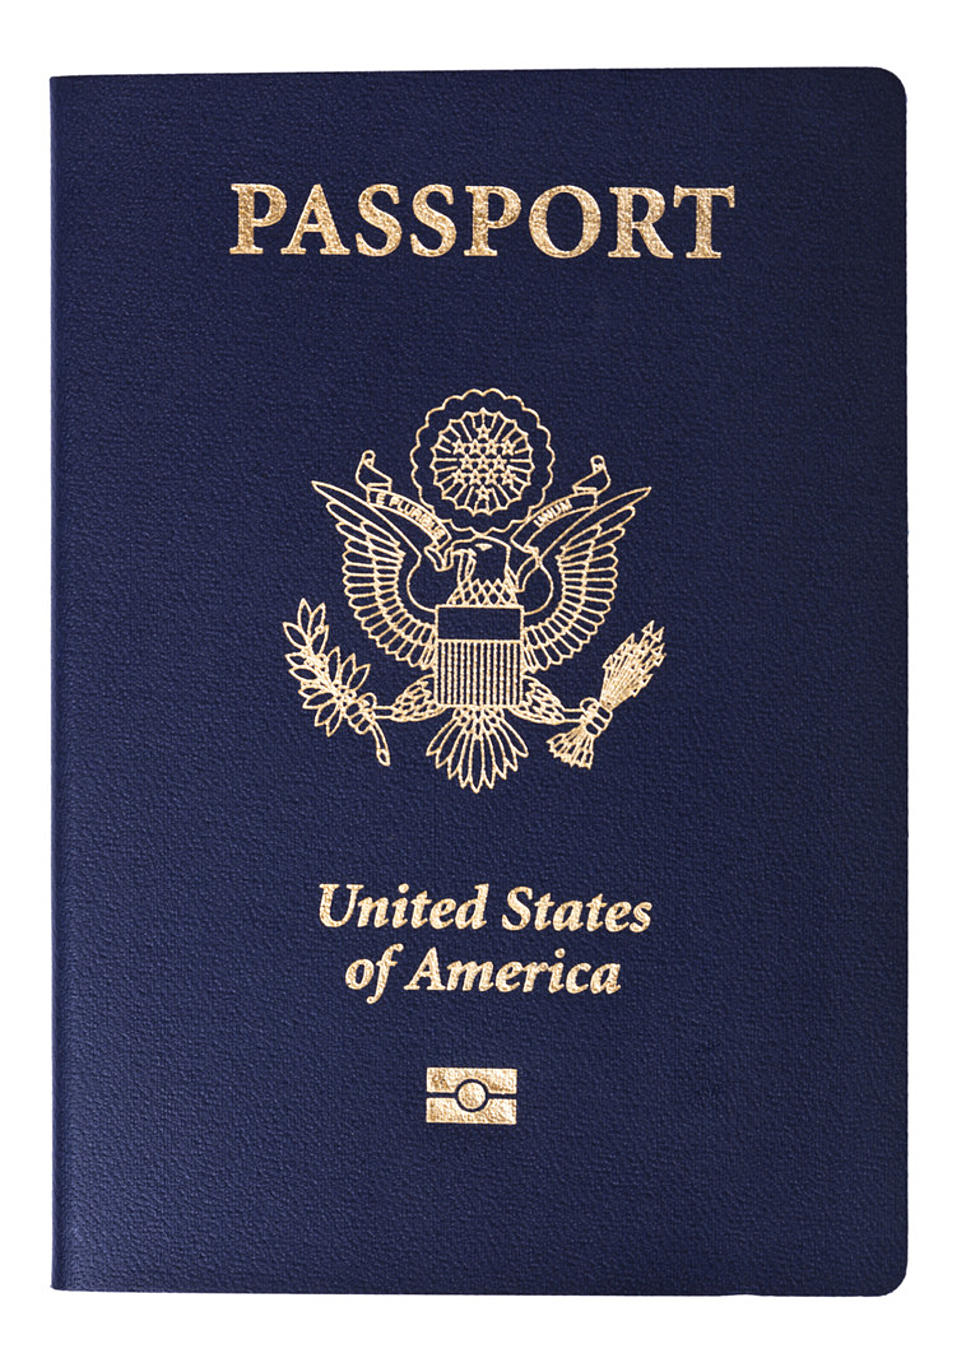 Need A Passport? What You Need To Know